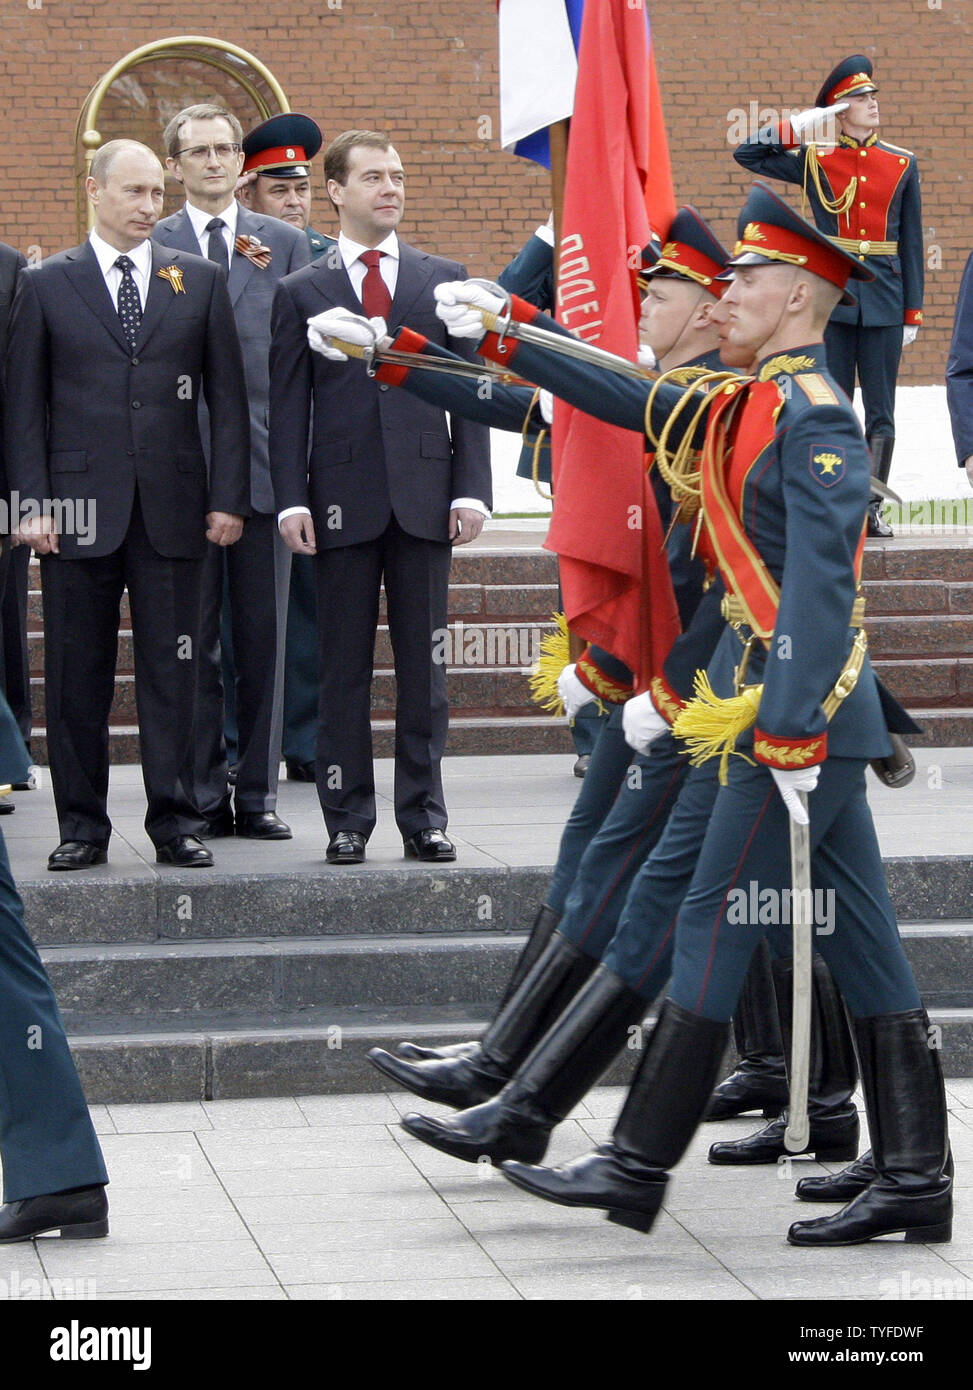 Russian President Dmitry Medvedev and Prime Minister Vladimir Putin (L) review the troops during a wreath laying ceremony at the Tomb of the Unknown Soldier in Moscow on May 8, 2009 on the eve of the Victory Day. On Saturday, May 9 Russia will celebrate the 64th anniversary of the World War Two victory over Nazi Germany. (UPI Photo/Anatoli Zhdanov) Stock Photo